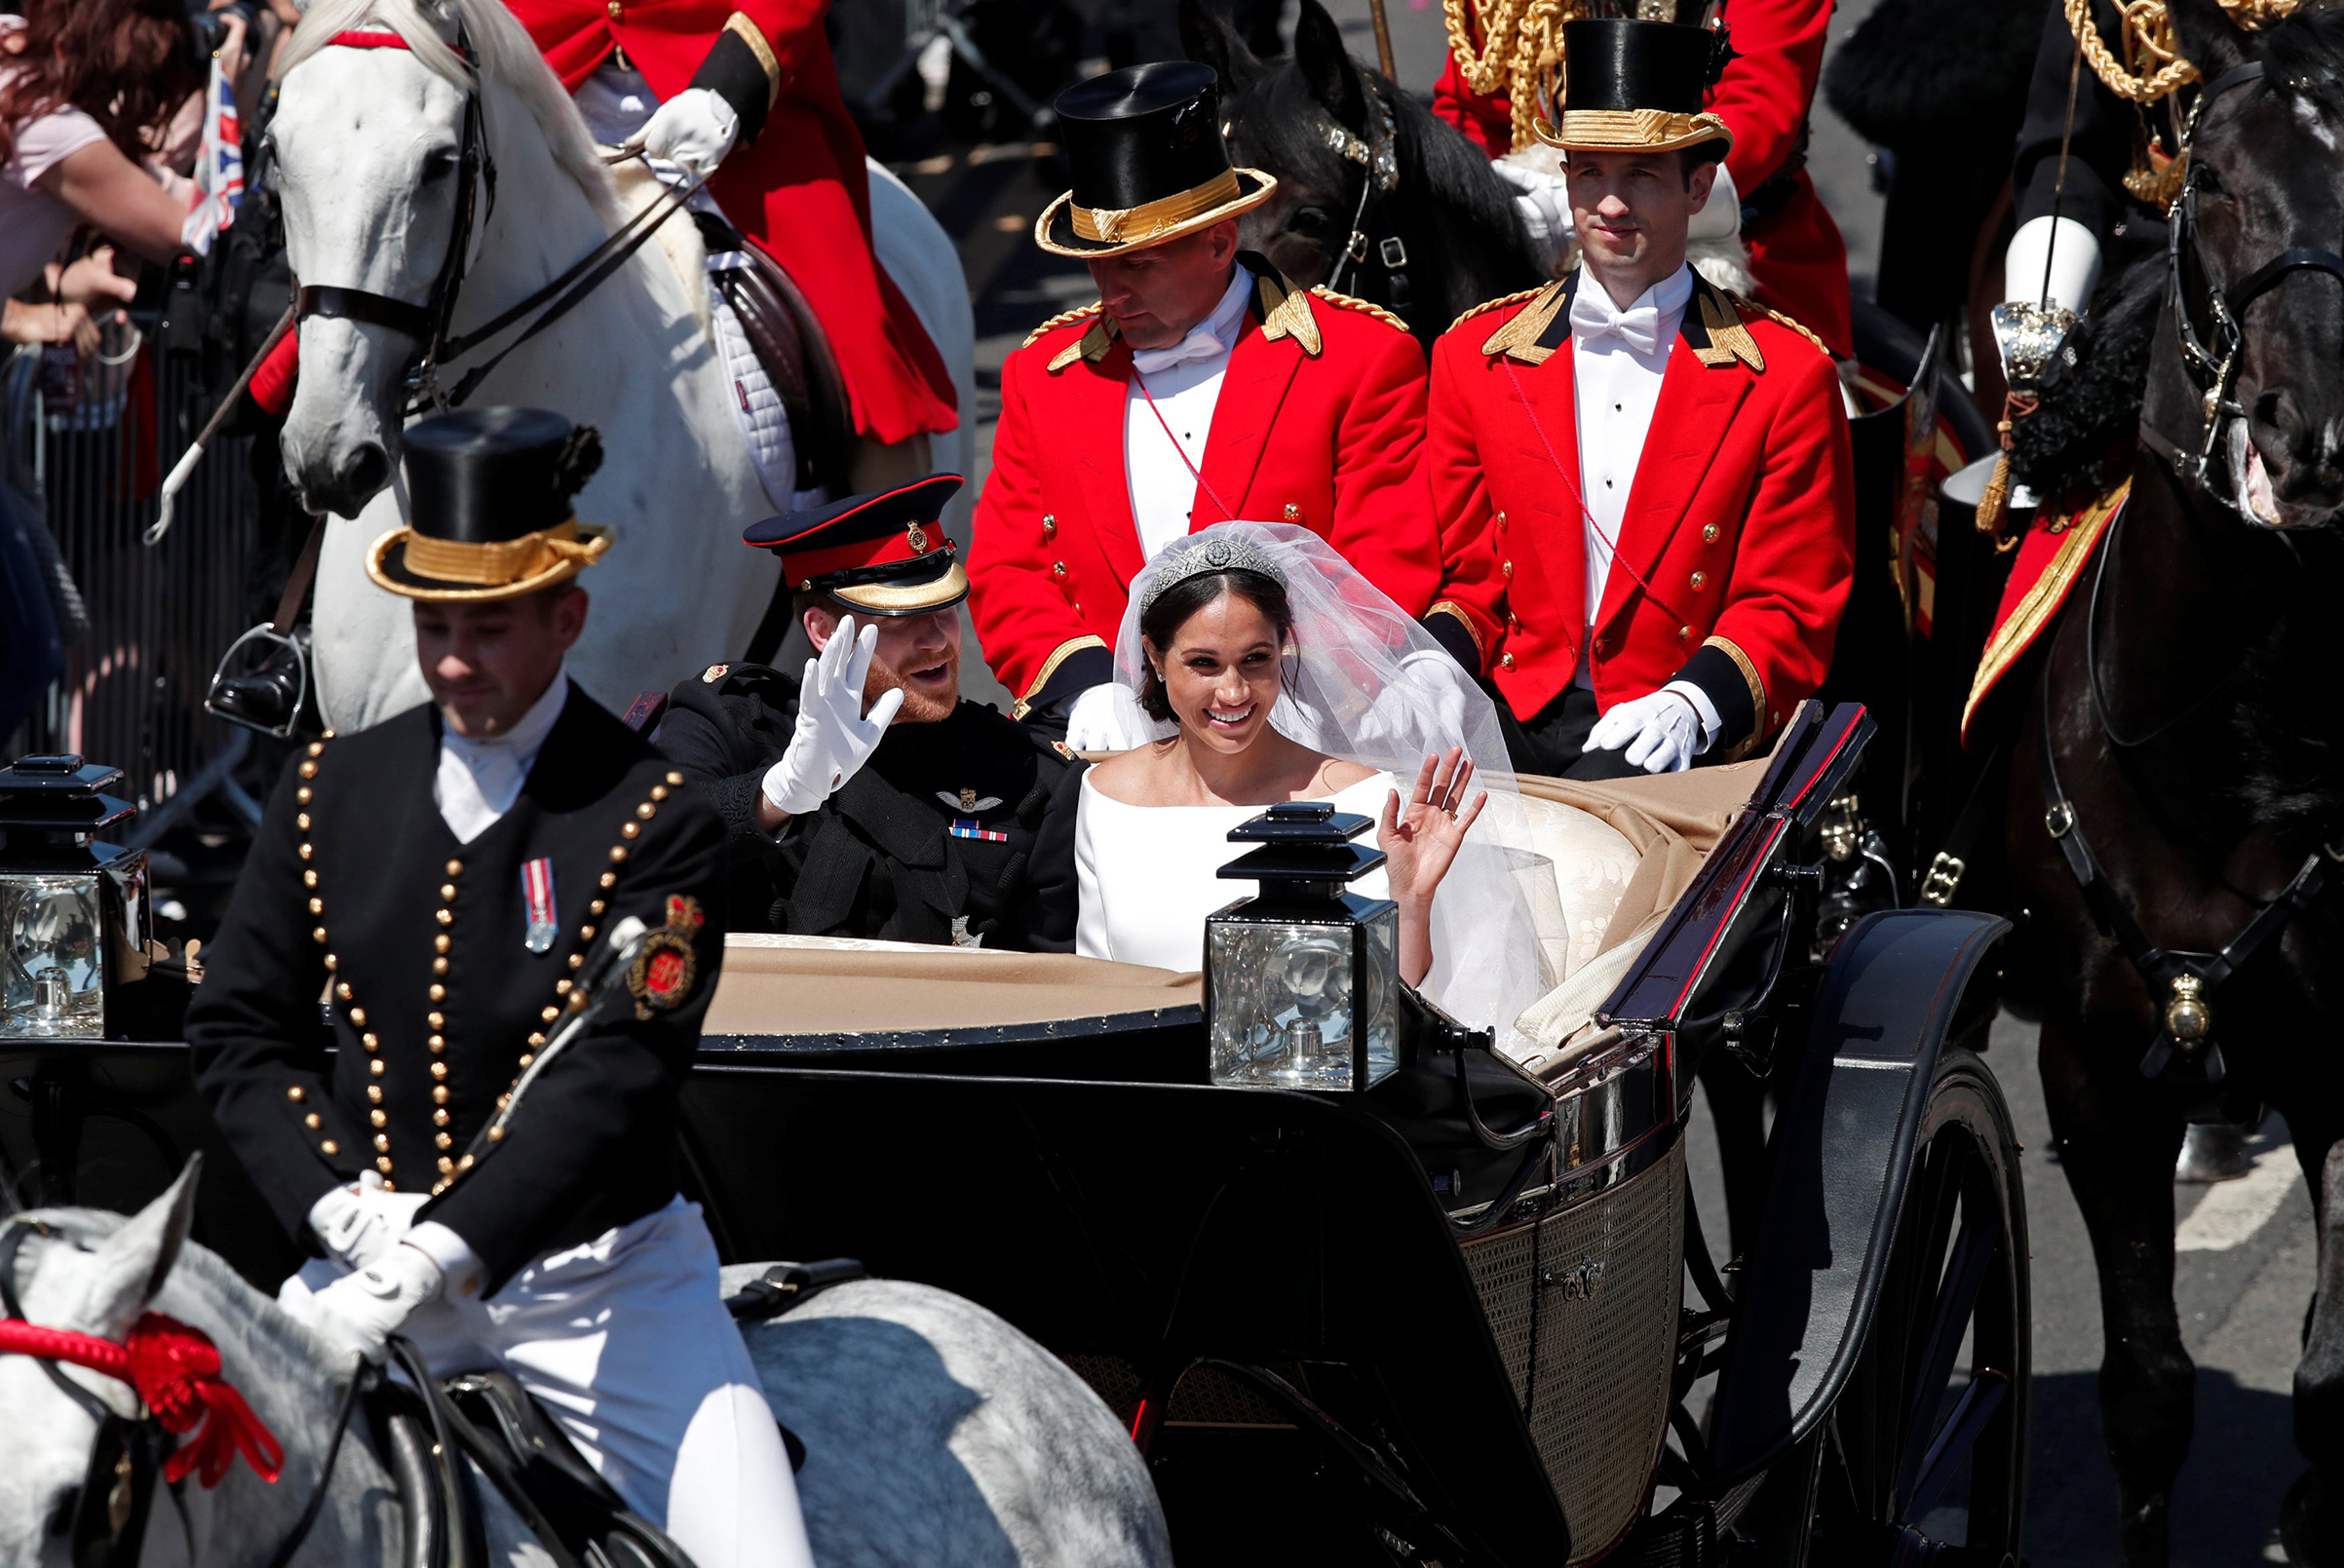 Prince Harry and Meghan Markle in a horse-drawn carriage after their wedding ceremony at St George's Chapel in Windsor Castle, May 19, 2018. (Benoit Tessier—Reuters)